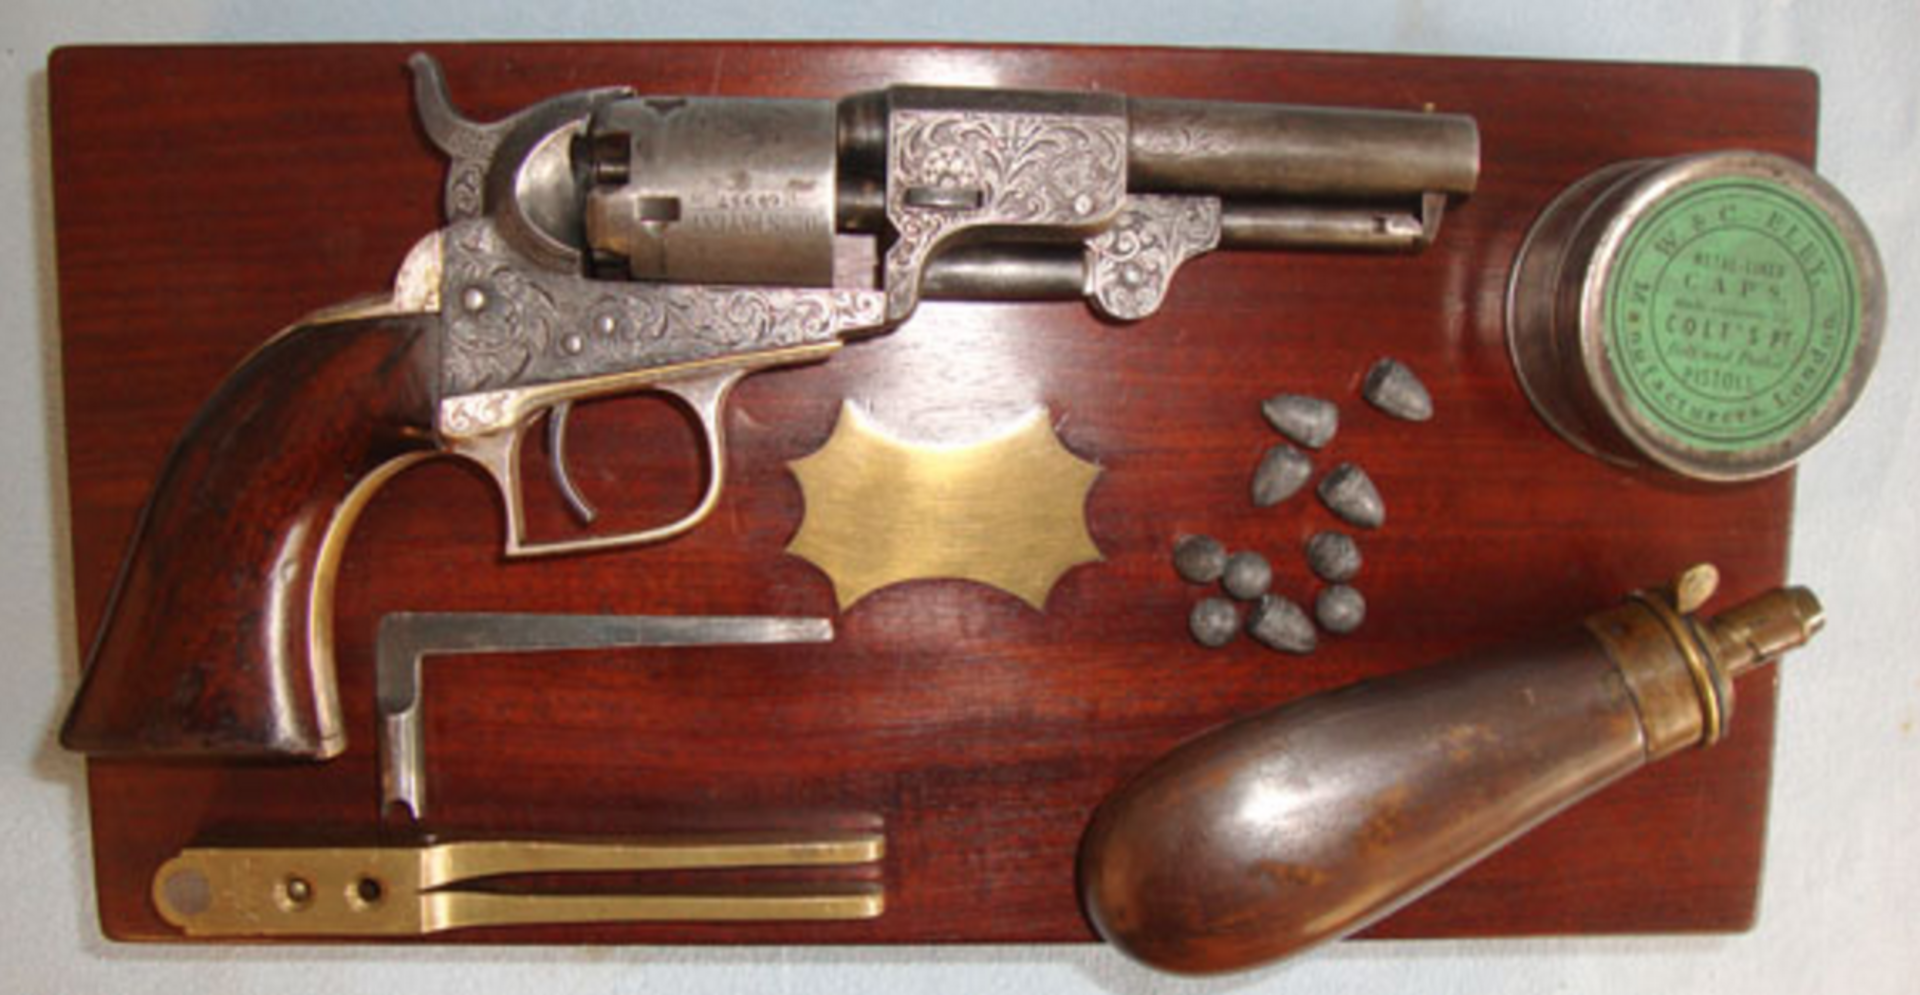 1853, Cased, Ornately Factory Engraved Colt .31 Calibre, Cap And Ball, 1849 Revolver And Accessories - Image 3 of 3